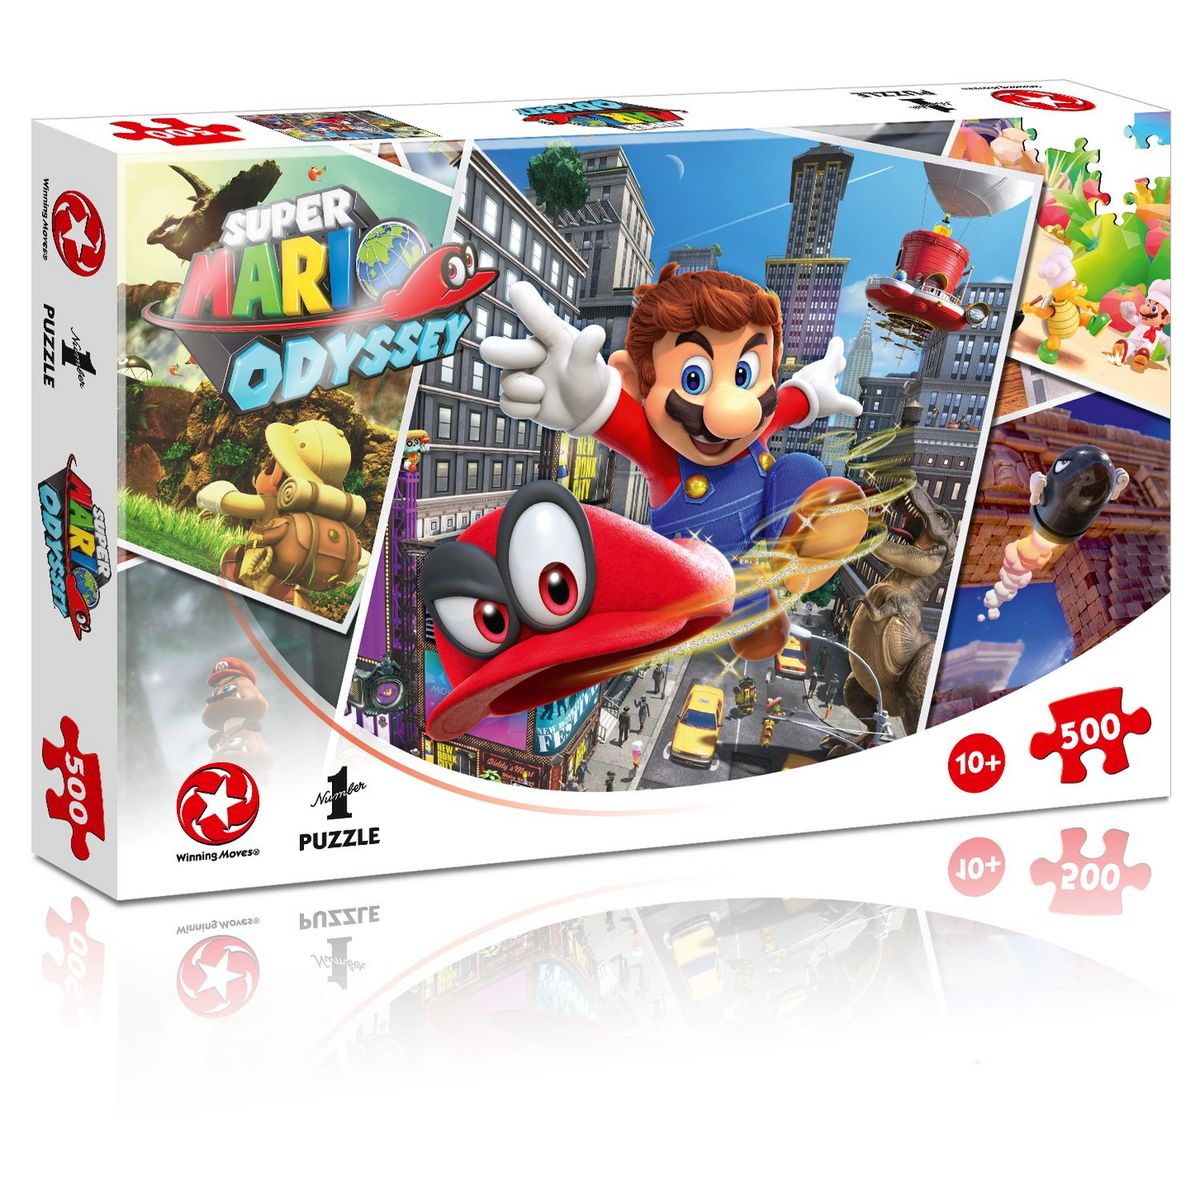  WINNING MOVES Puzzle 500 pièces Super Mario Odyssey World Traveler